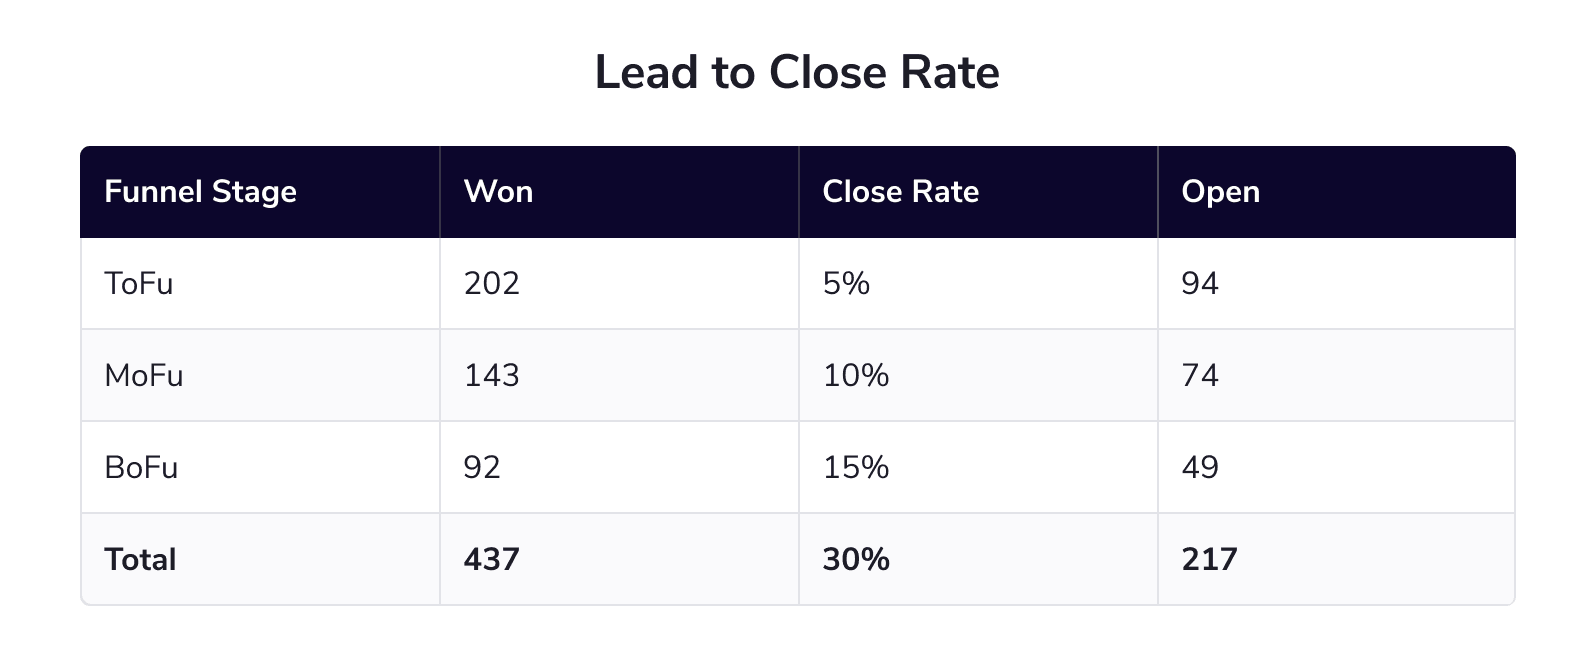 Lead to close rate